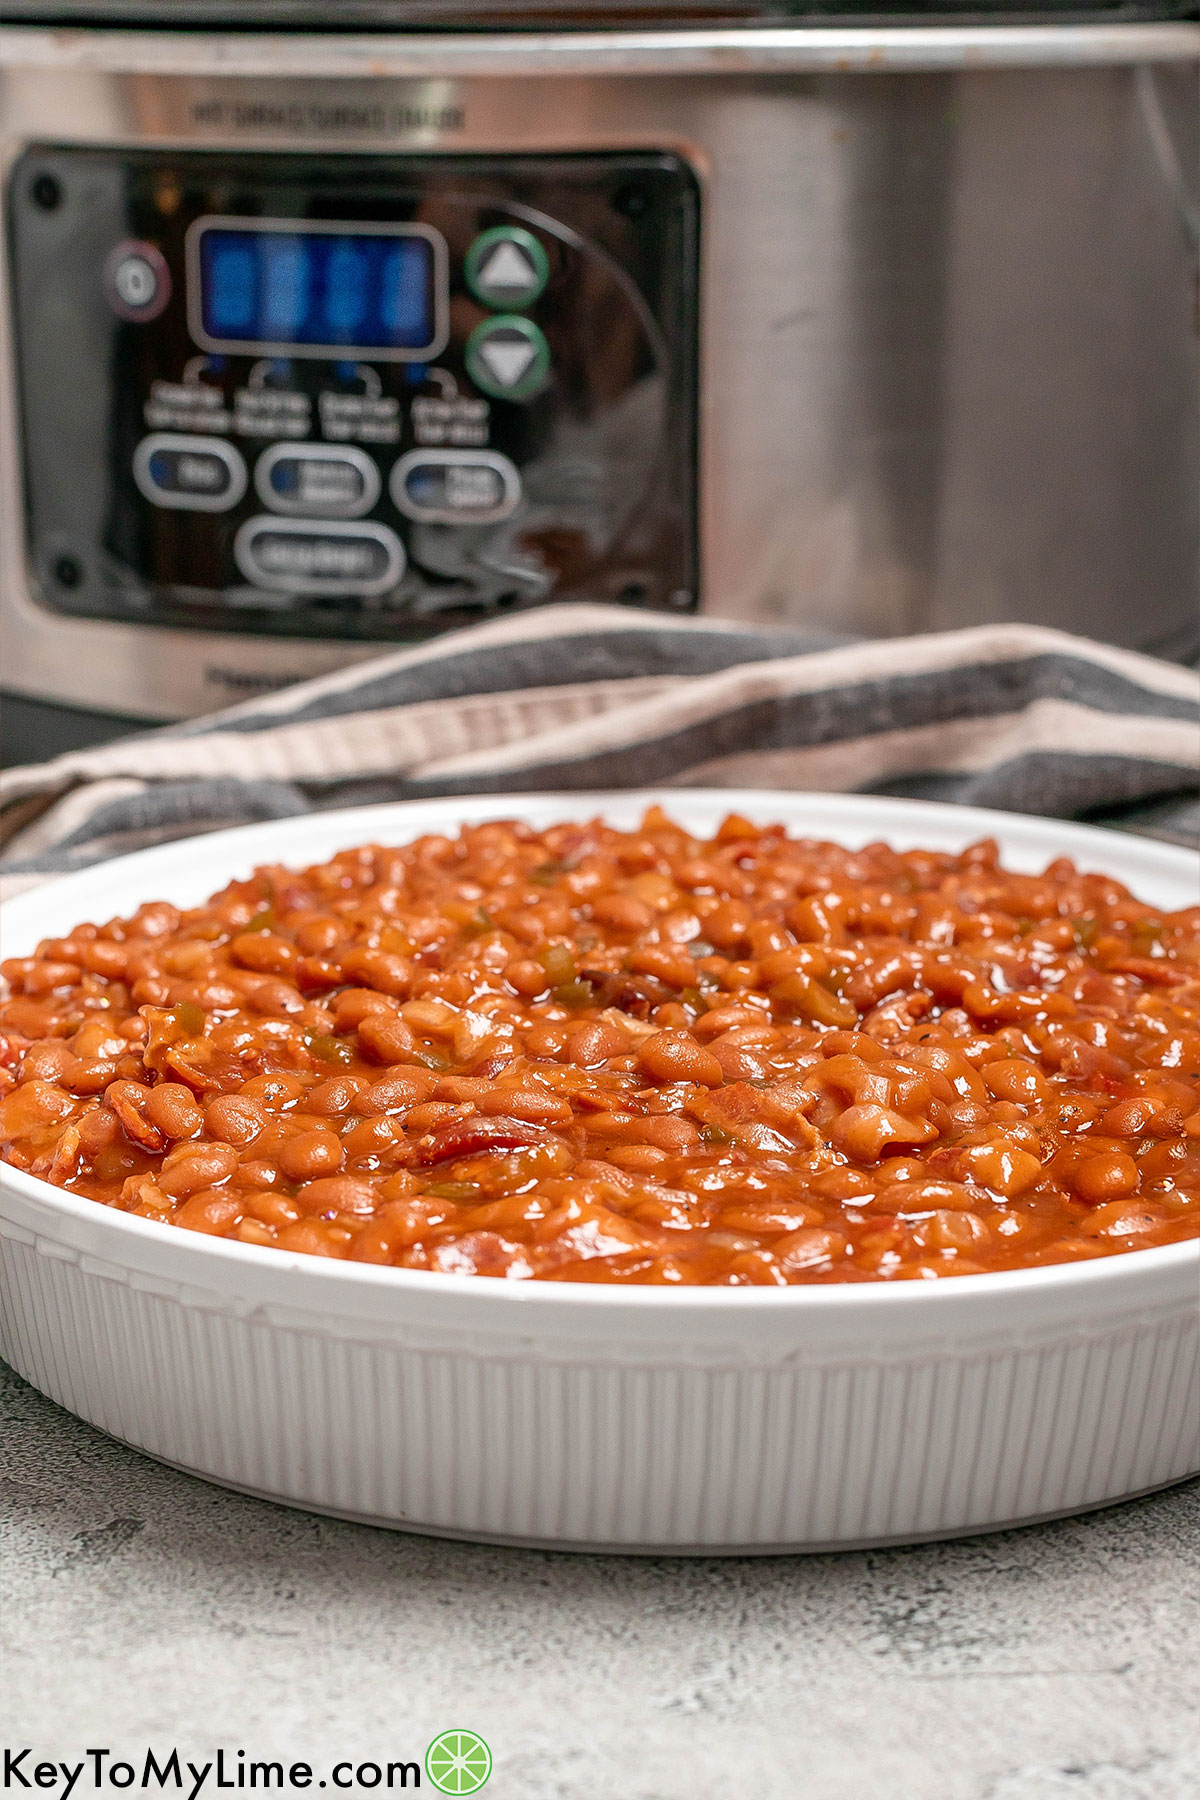 A side image of a baked bean dish served in a white bowl with crockpot in the background.